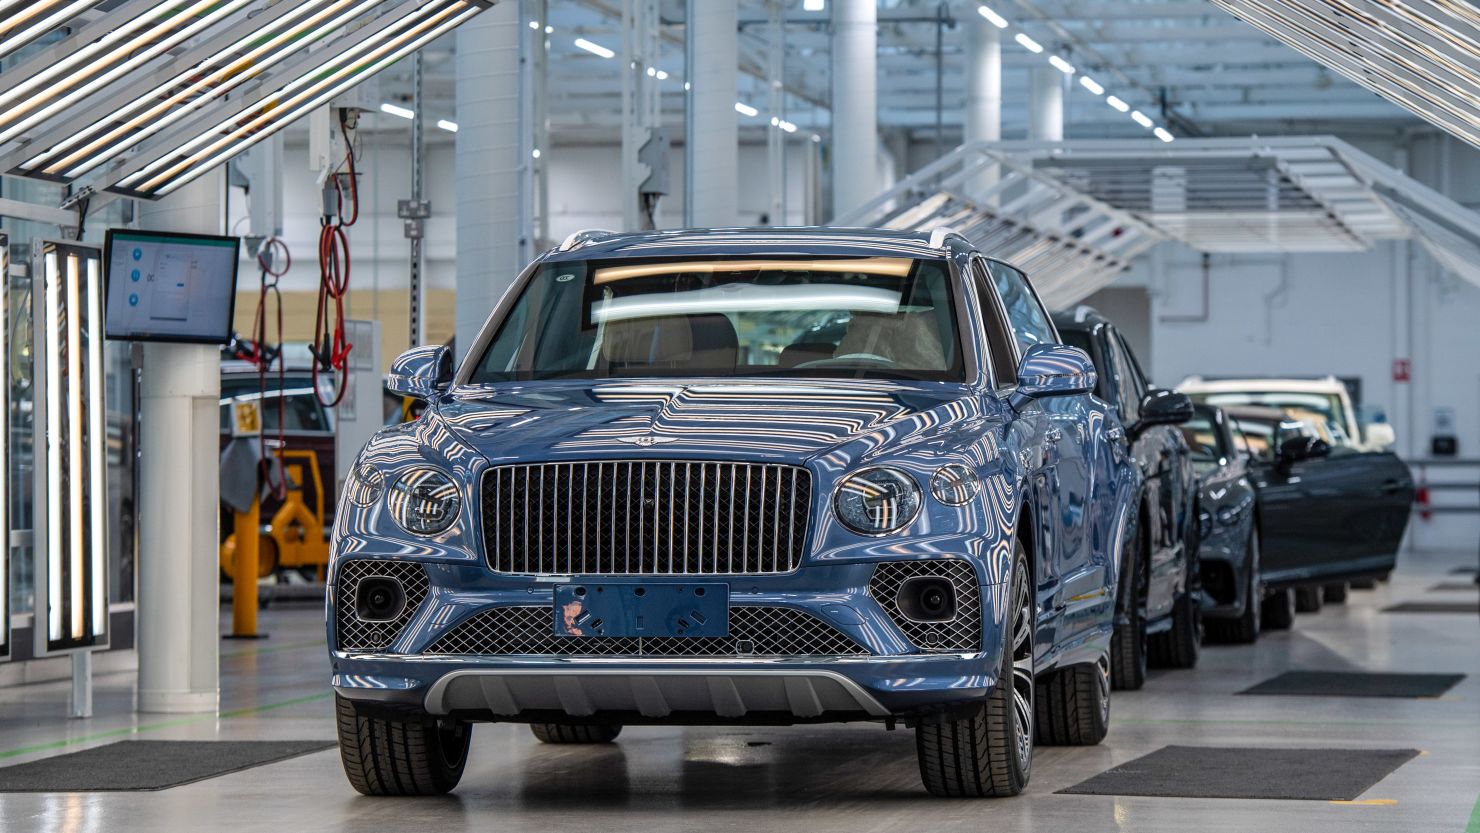 A Bentley Bentayga sport utility vehicle in the final inspection area on the production line at the Bentley Motors Ltd. headquarters in Crewe, UK.